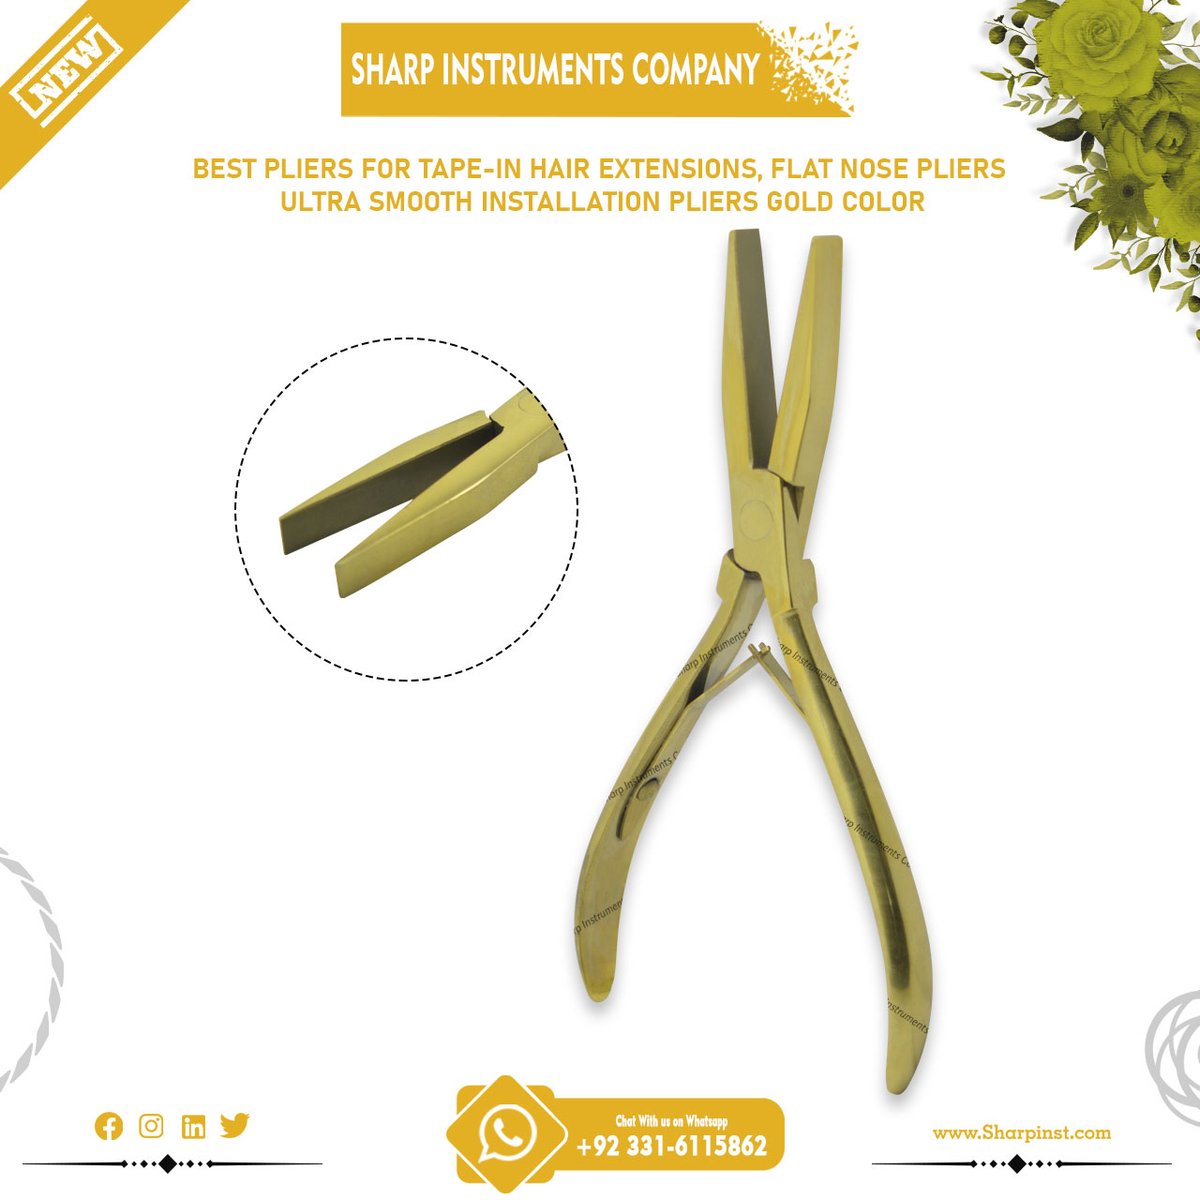 TAPE-IN HAIR EXTENSIONS PLIERS.
#hairextensions #hairextensionstarterkit #prebondedstarterkit #hairextensiontools  #hairxtensions